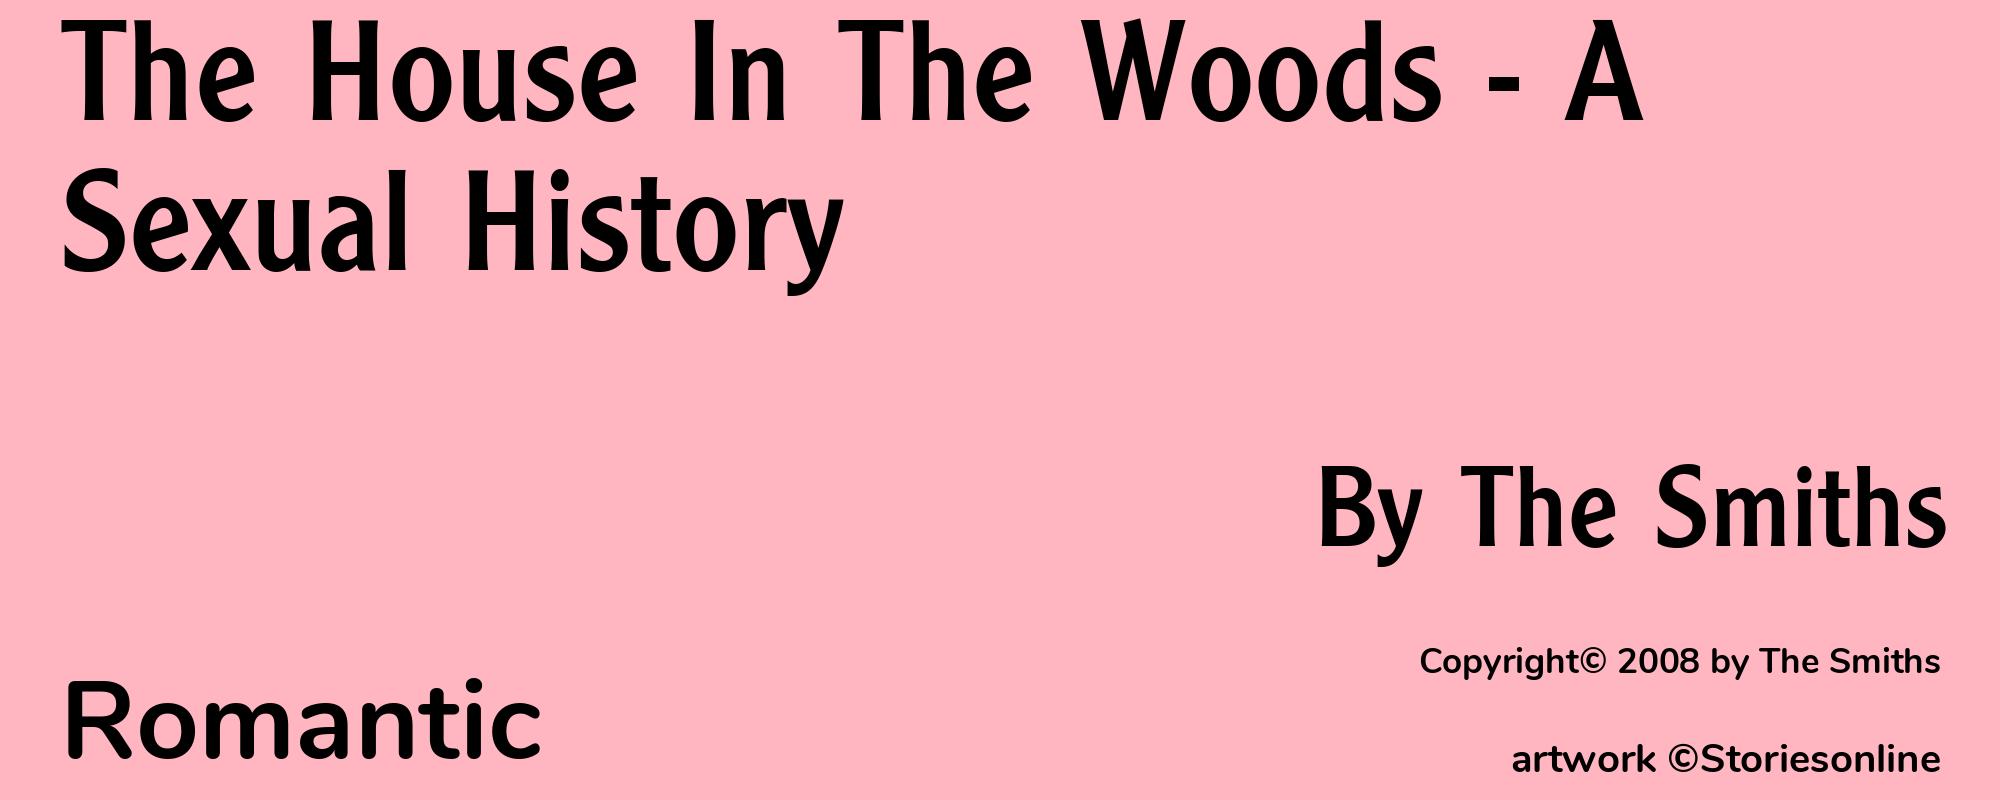 The House In The Woods - A Sexual History - Cover